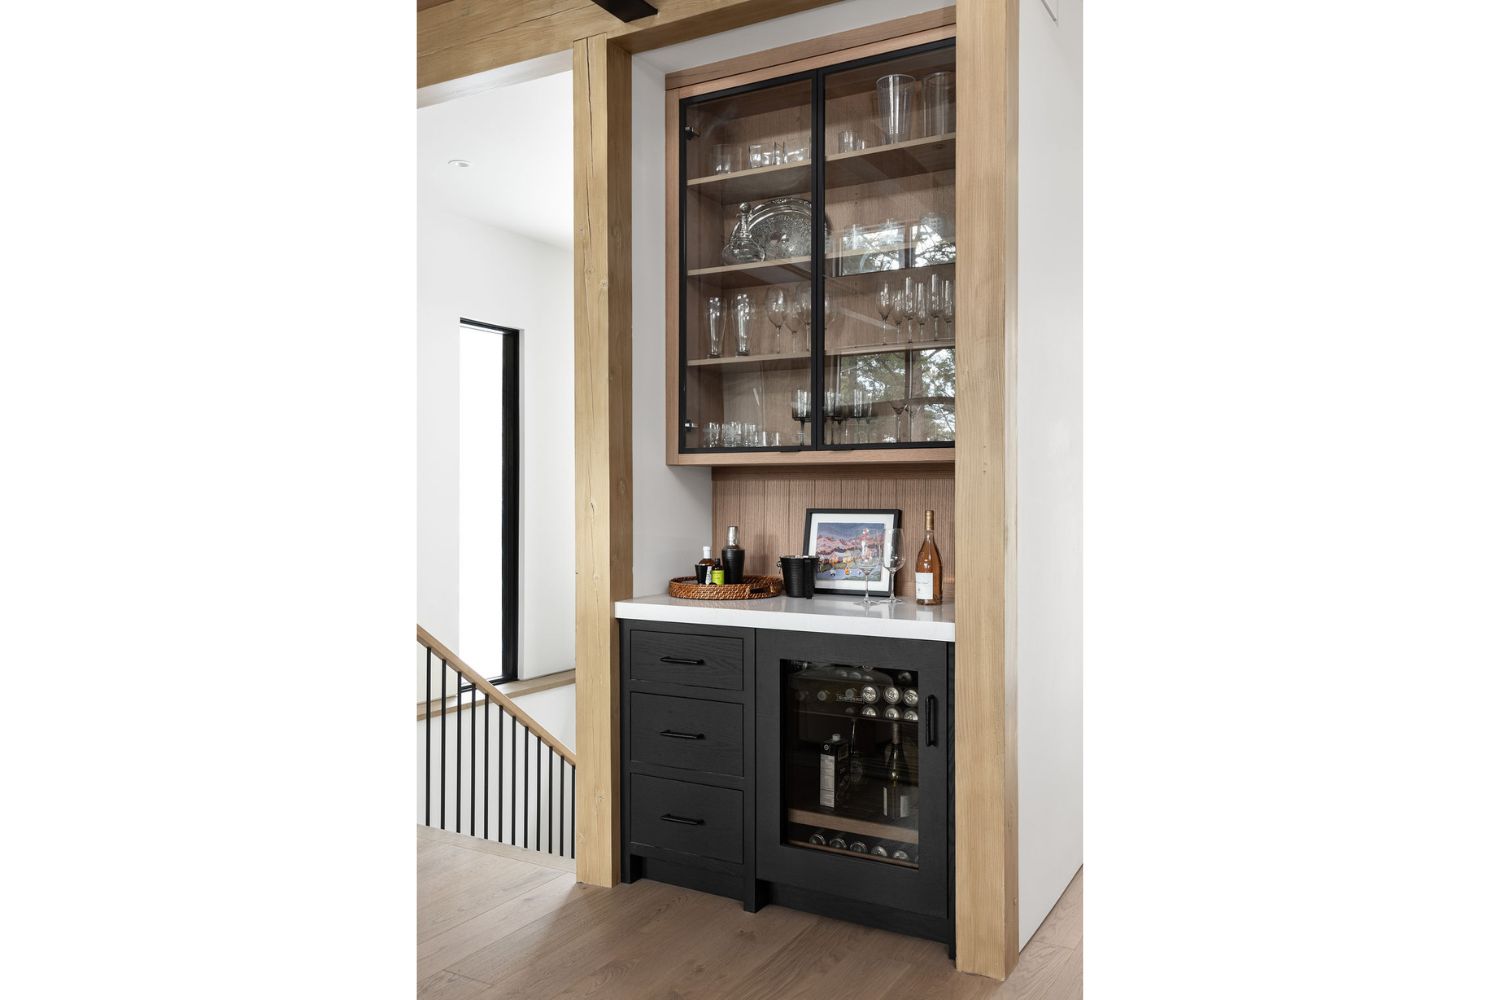 Project Fieldale: Kitchen bar with oak cabinets and glass